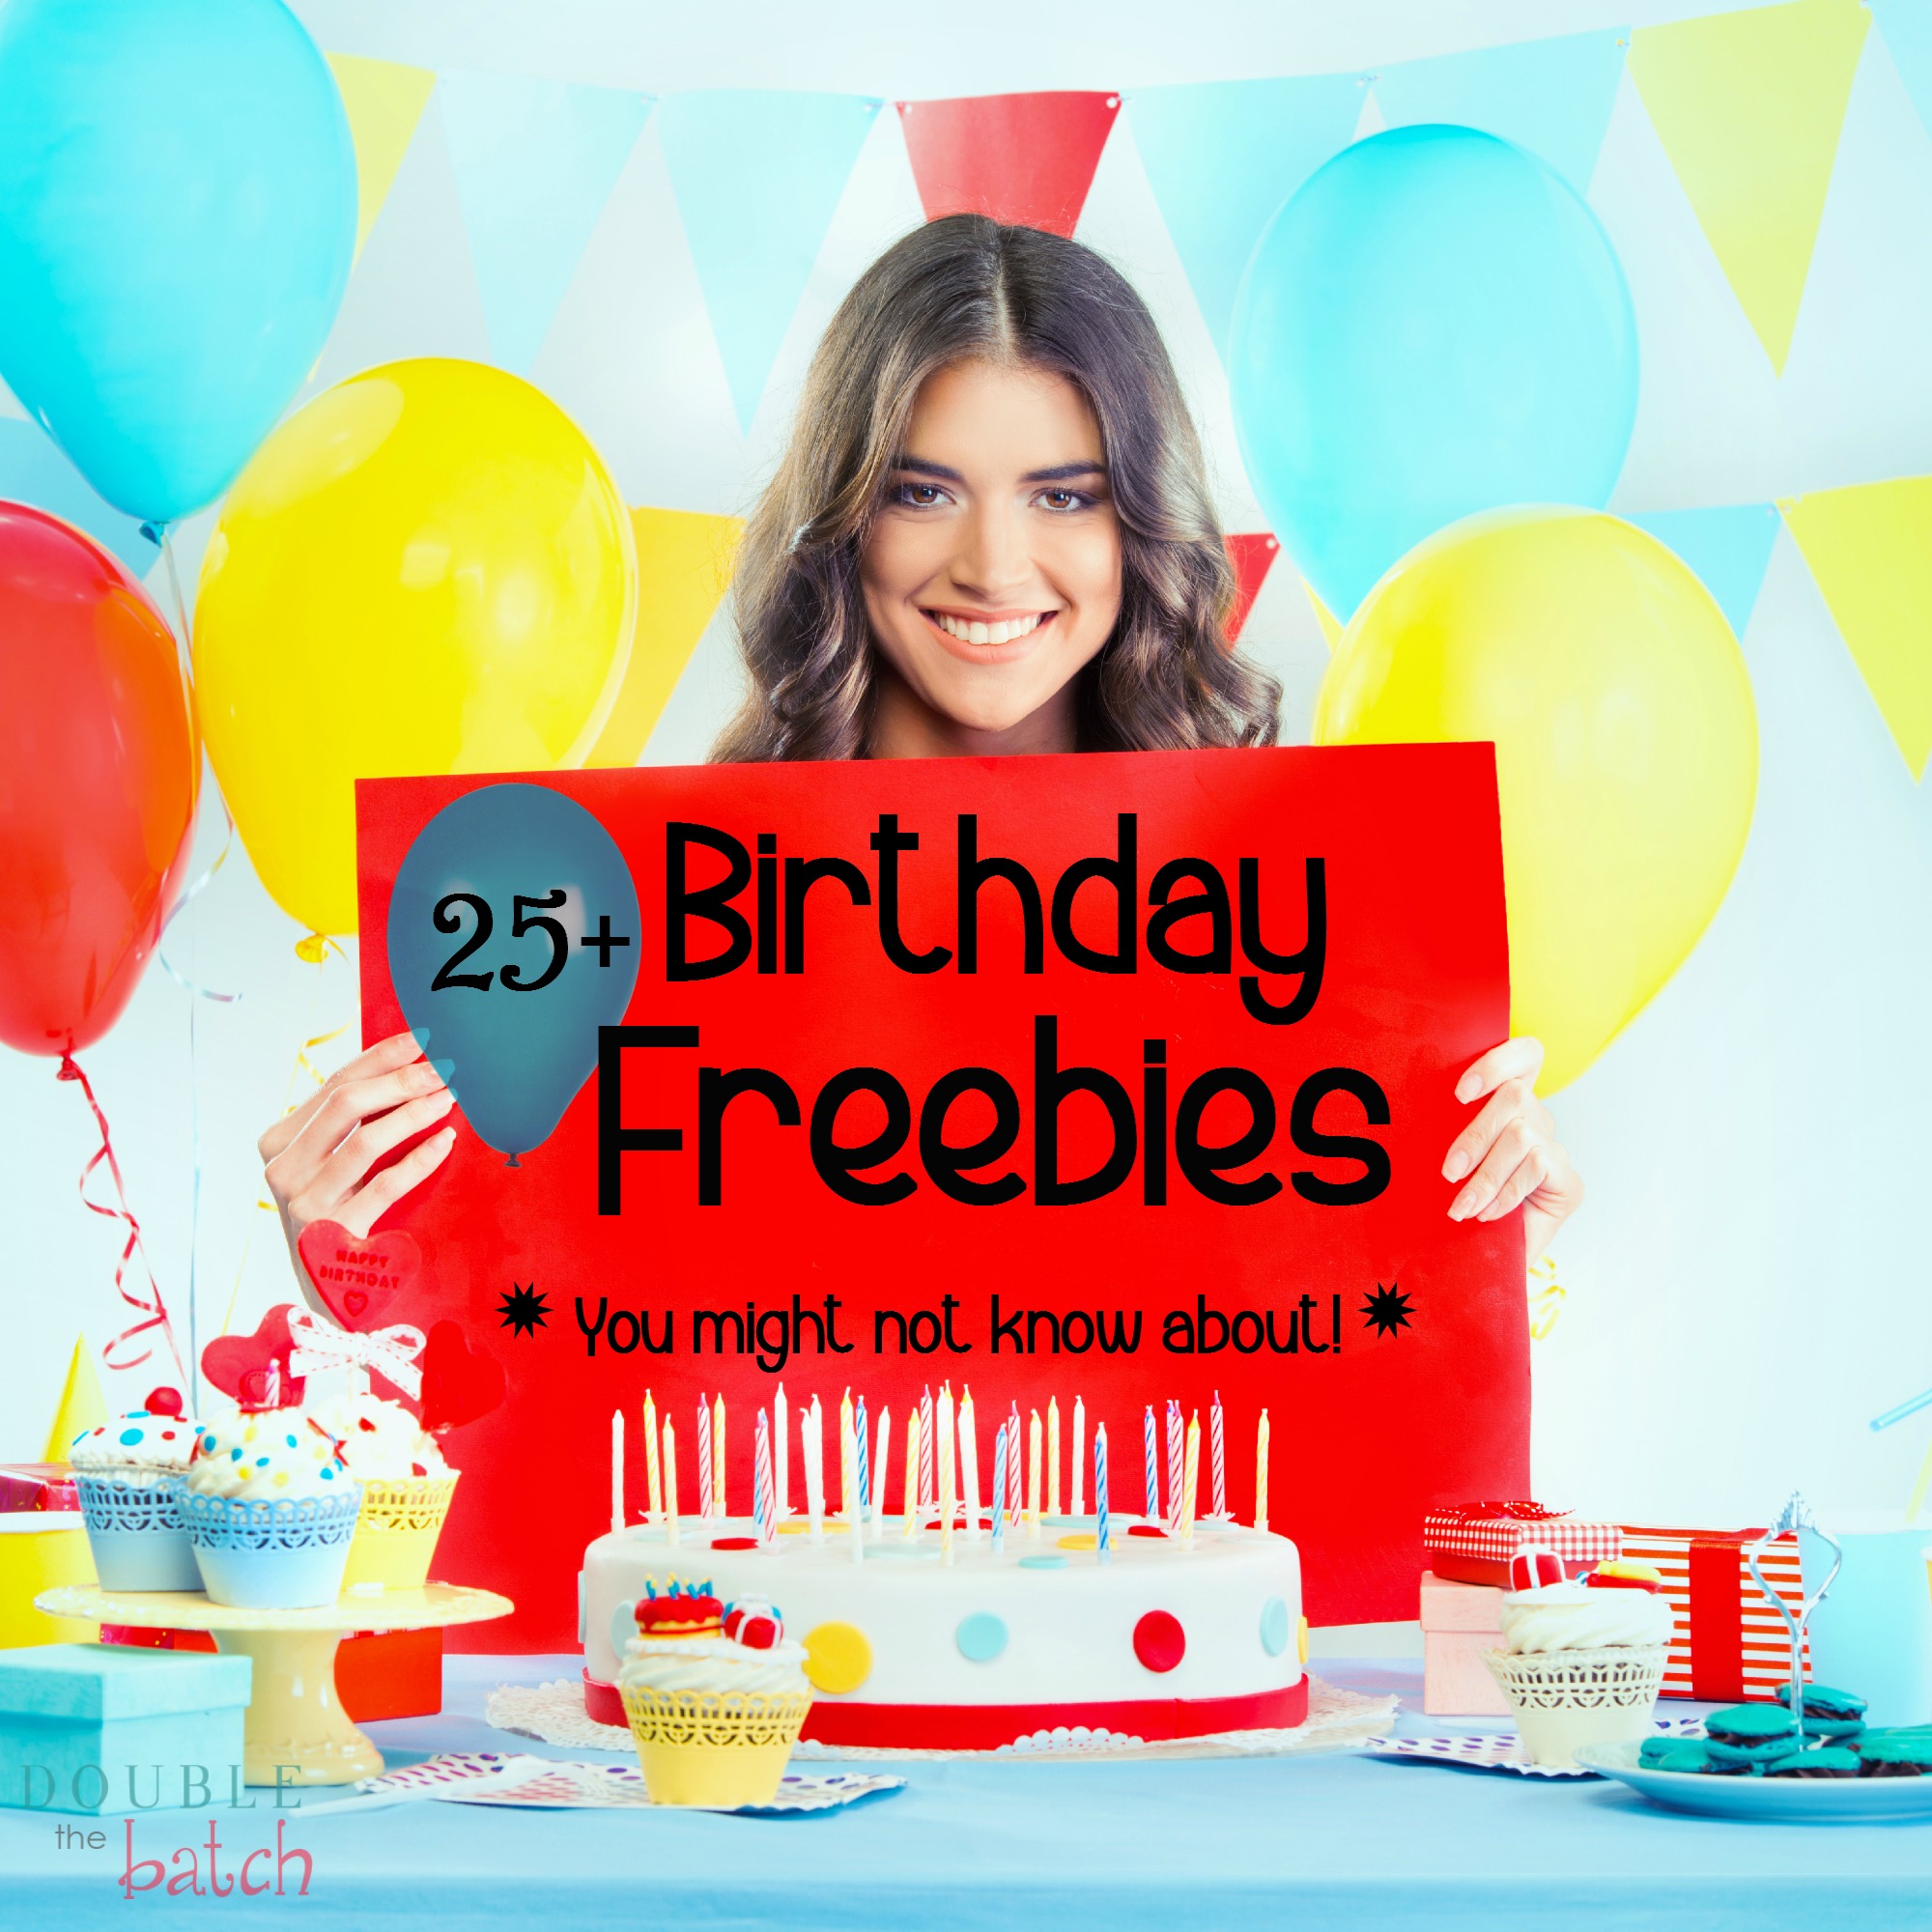 25+ Birthday Freebies you might not know about!